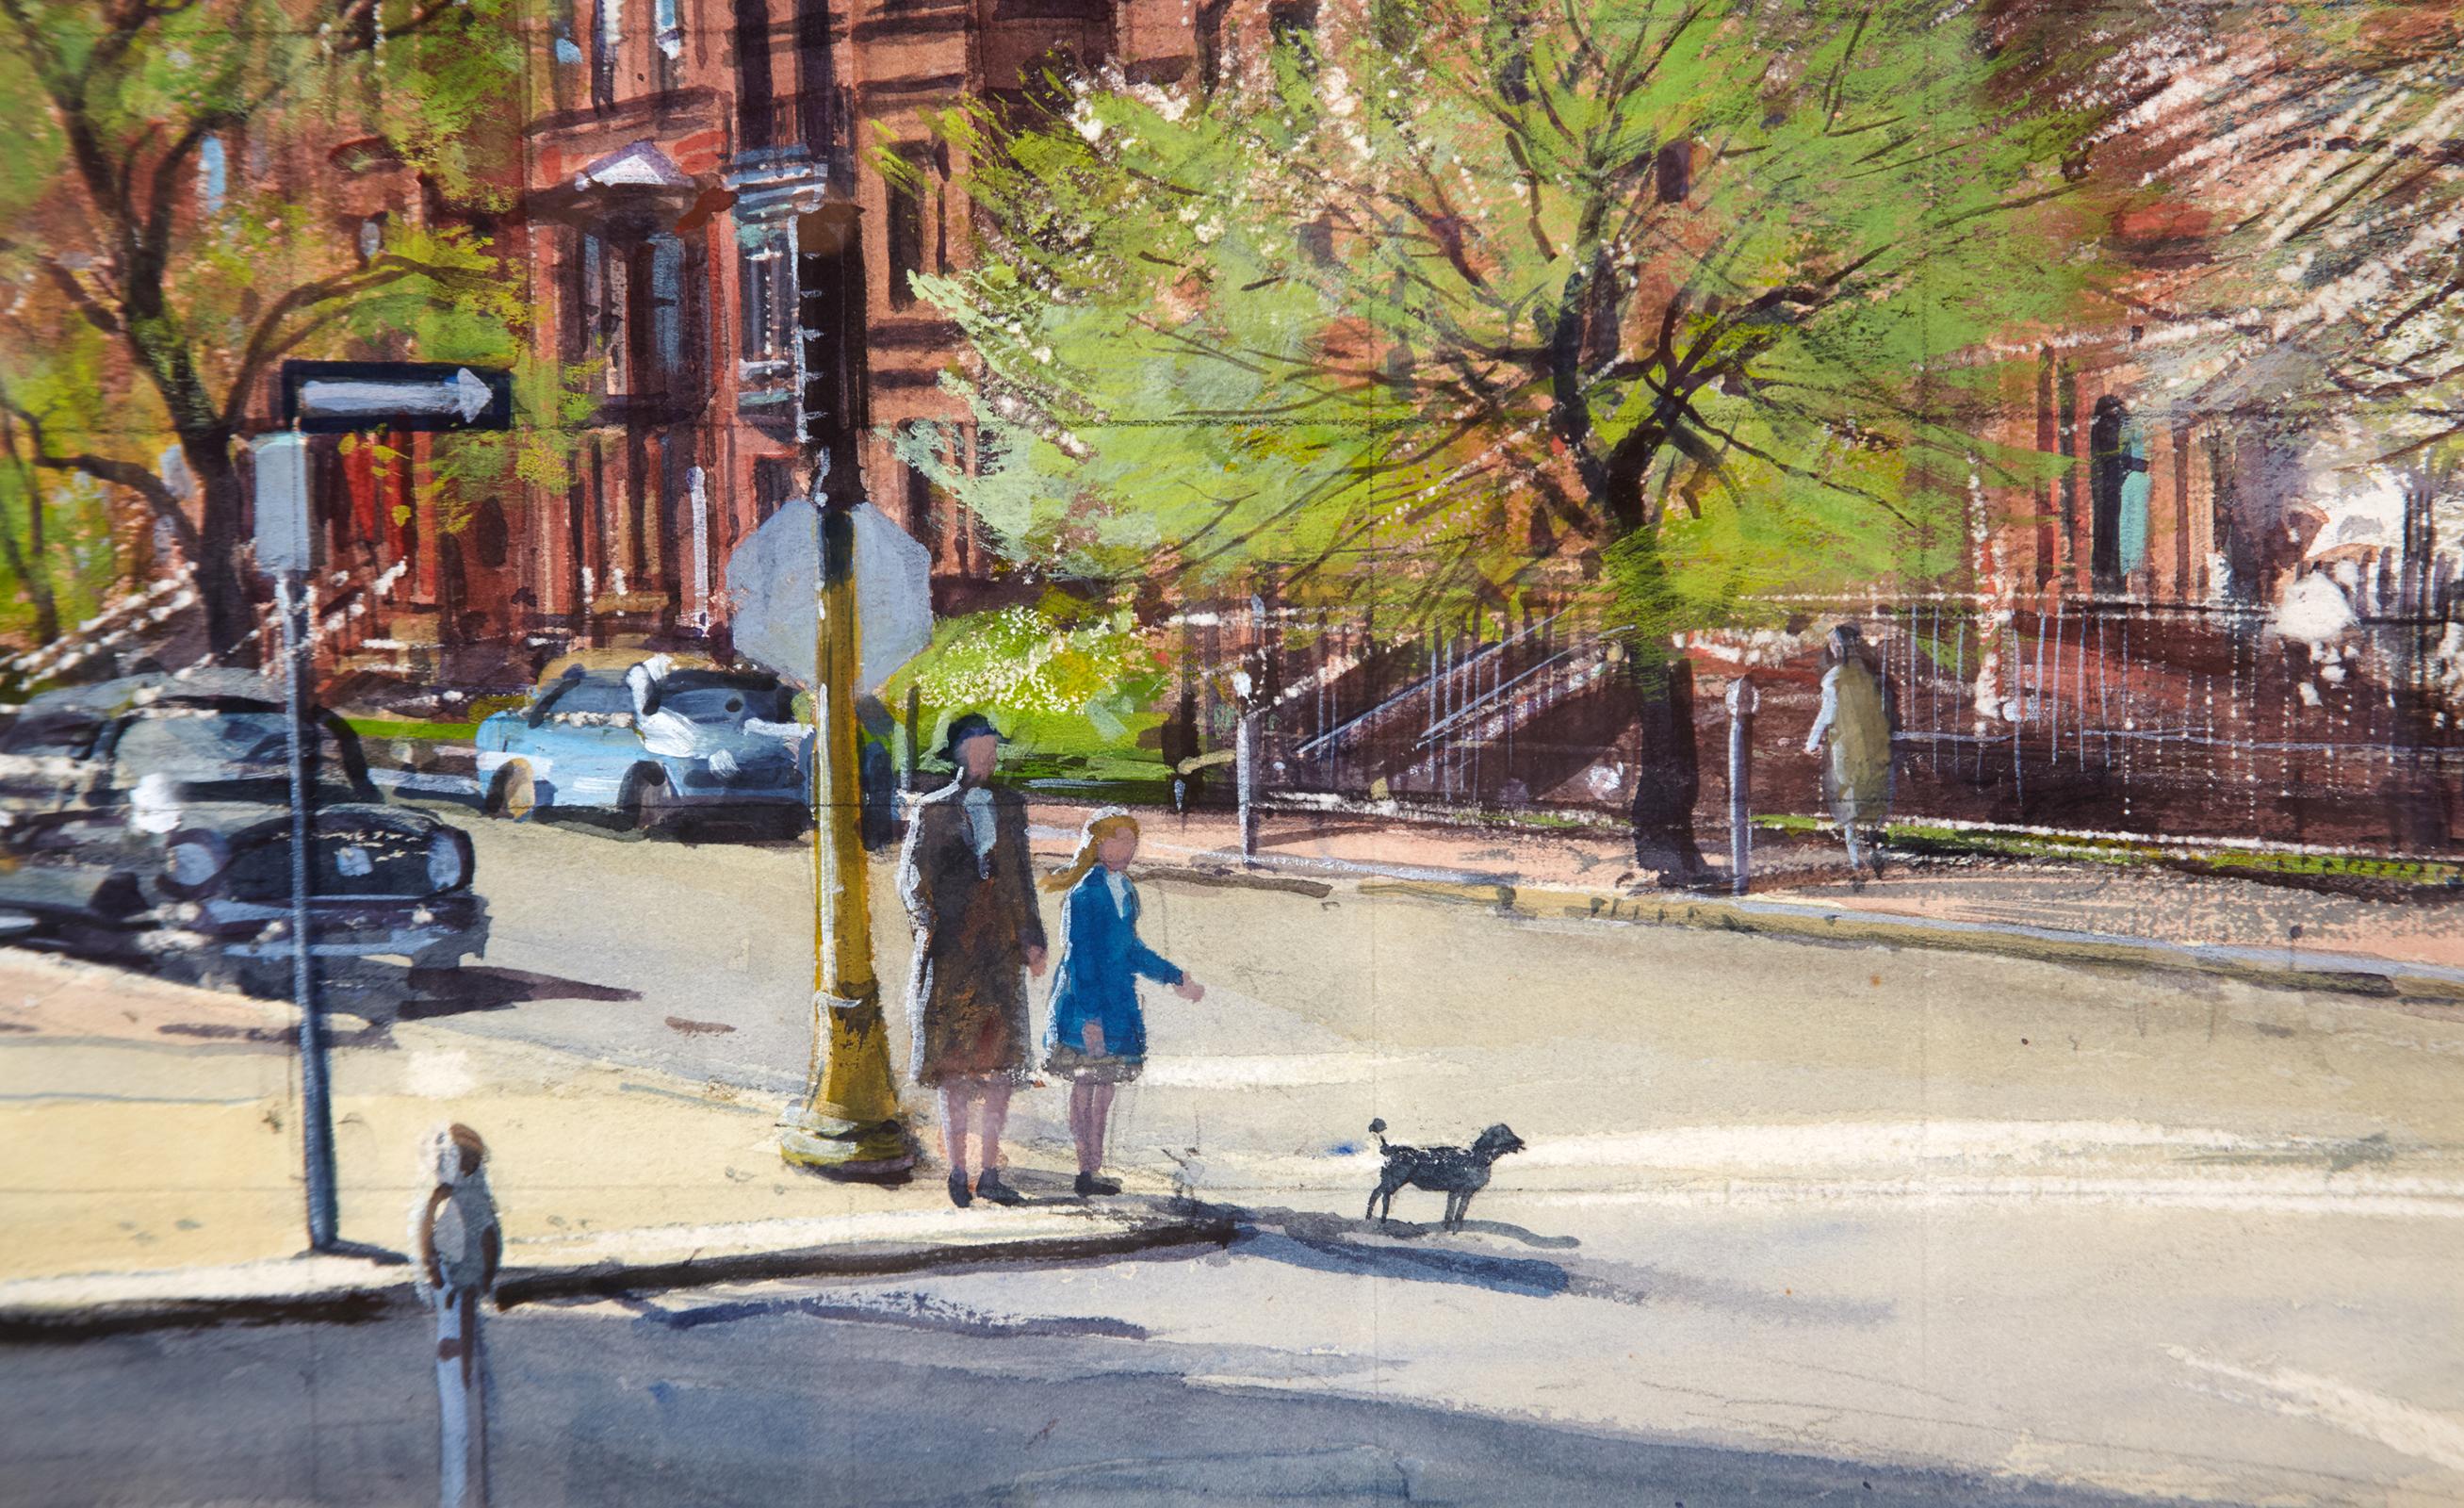 Painted Watercolor Painting 'The Stop Light' by A. Lassell Ripley, Listed Am. Artist